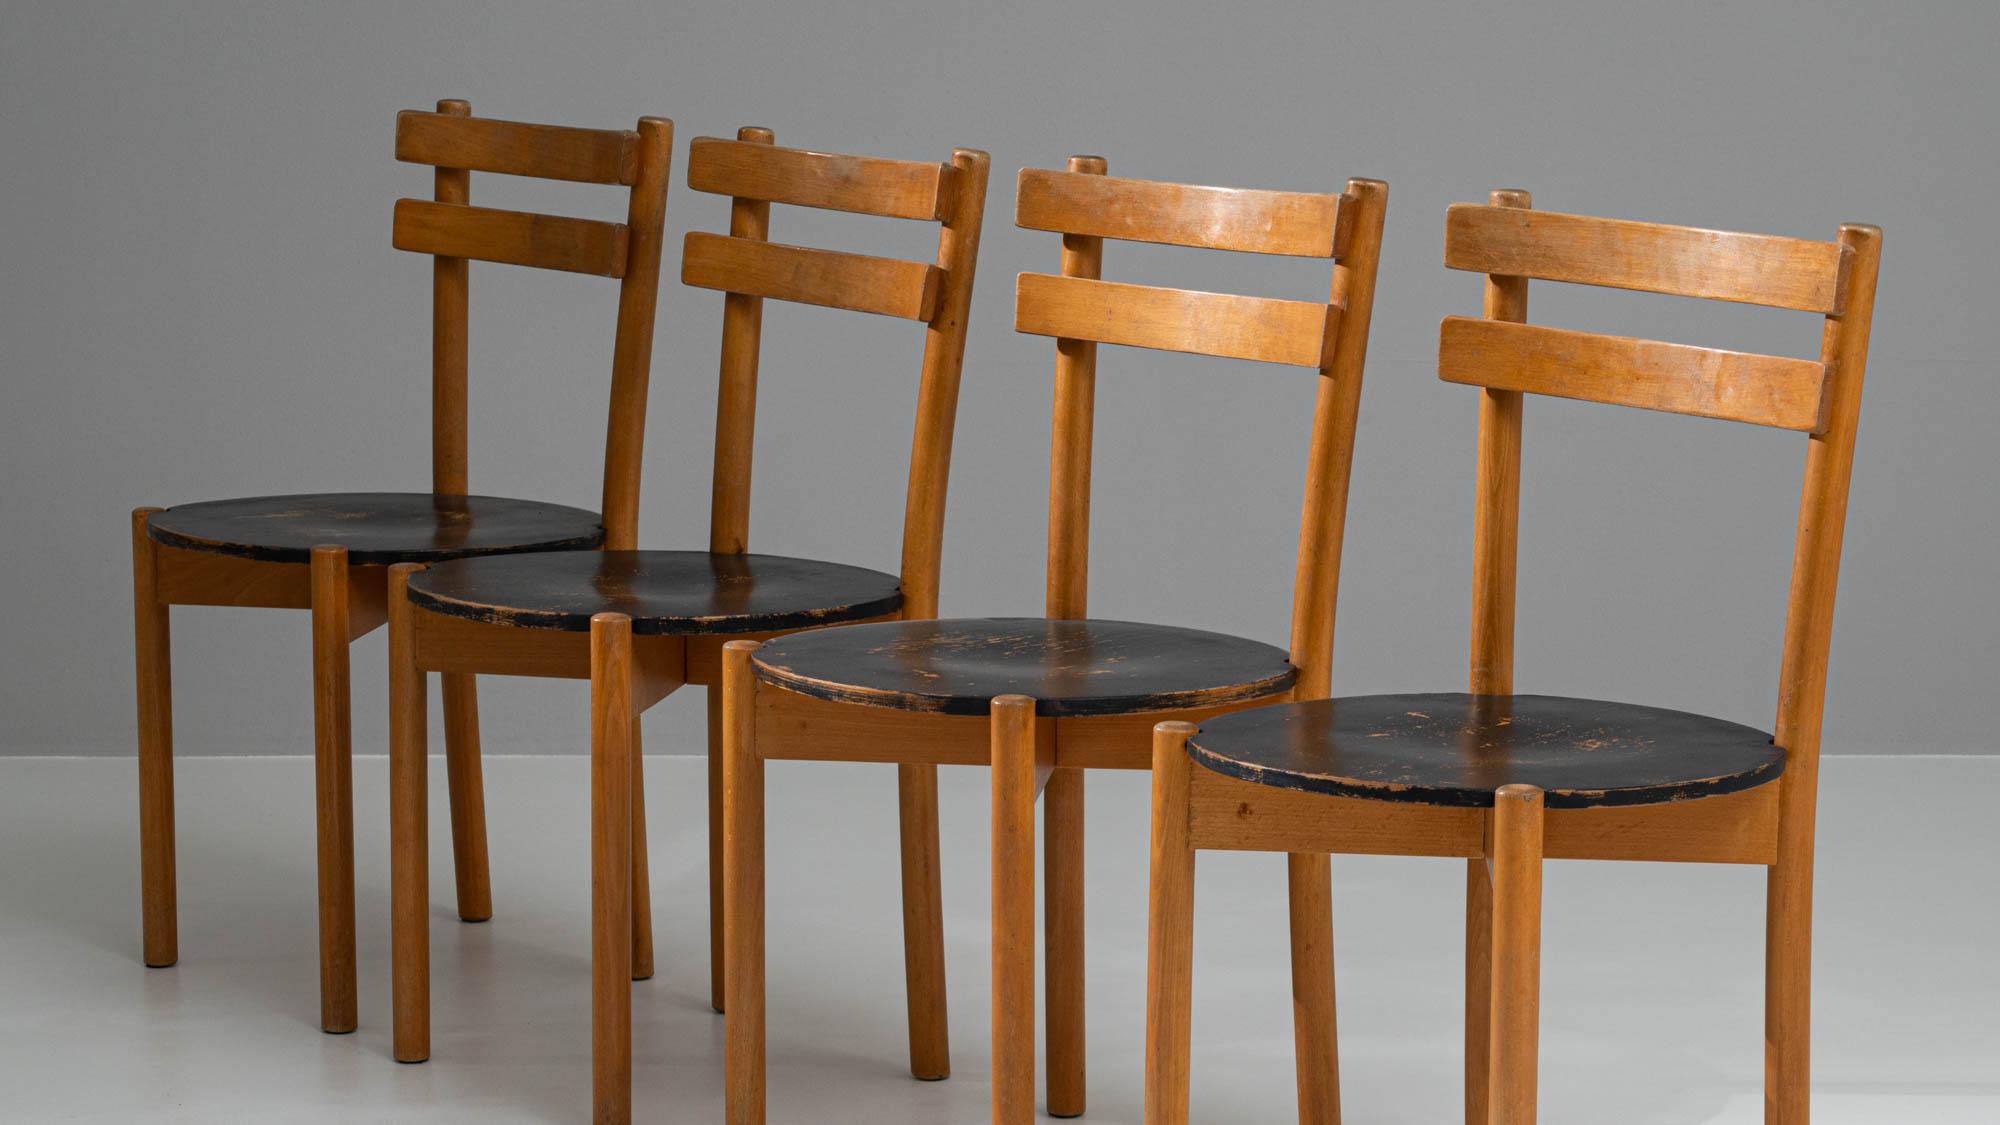 20th Century German EKA Wohnmöbel Wooden Dining Chairs, Set of 4 For Sale 5